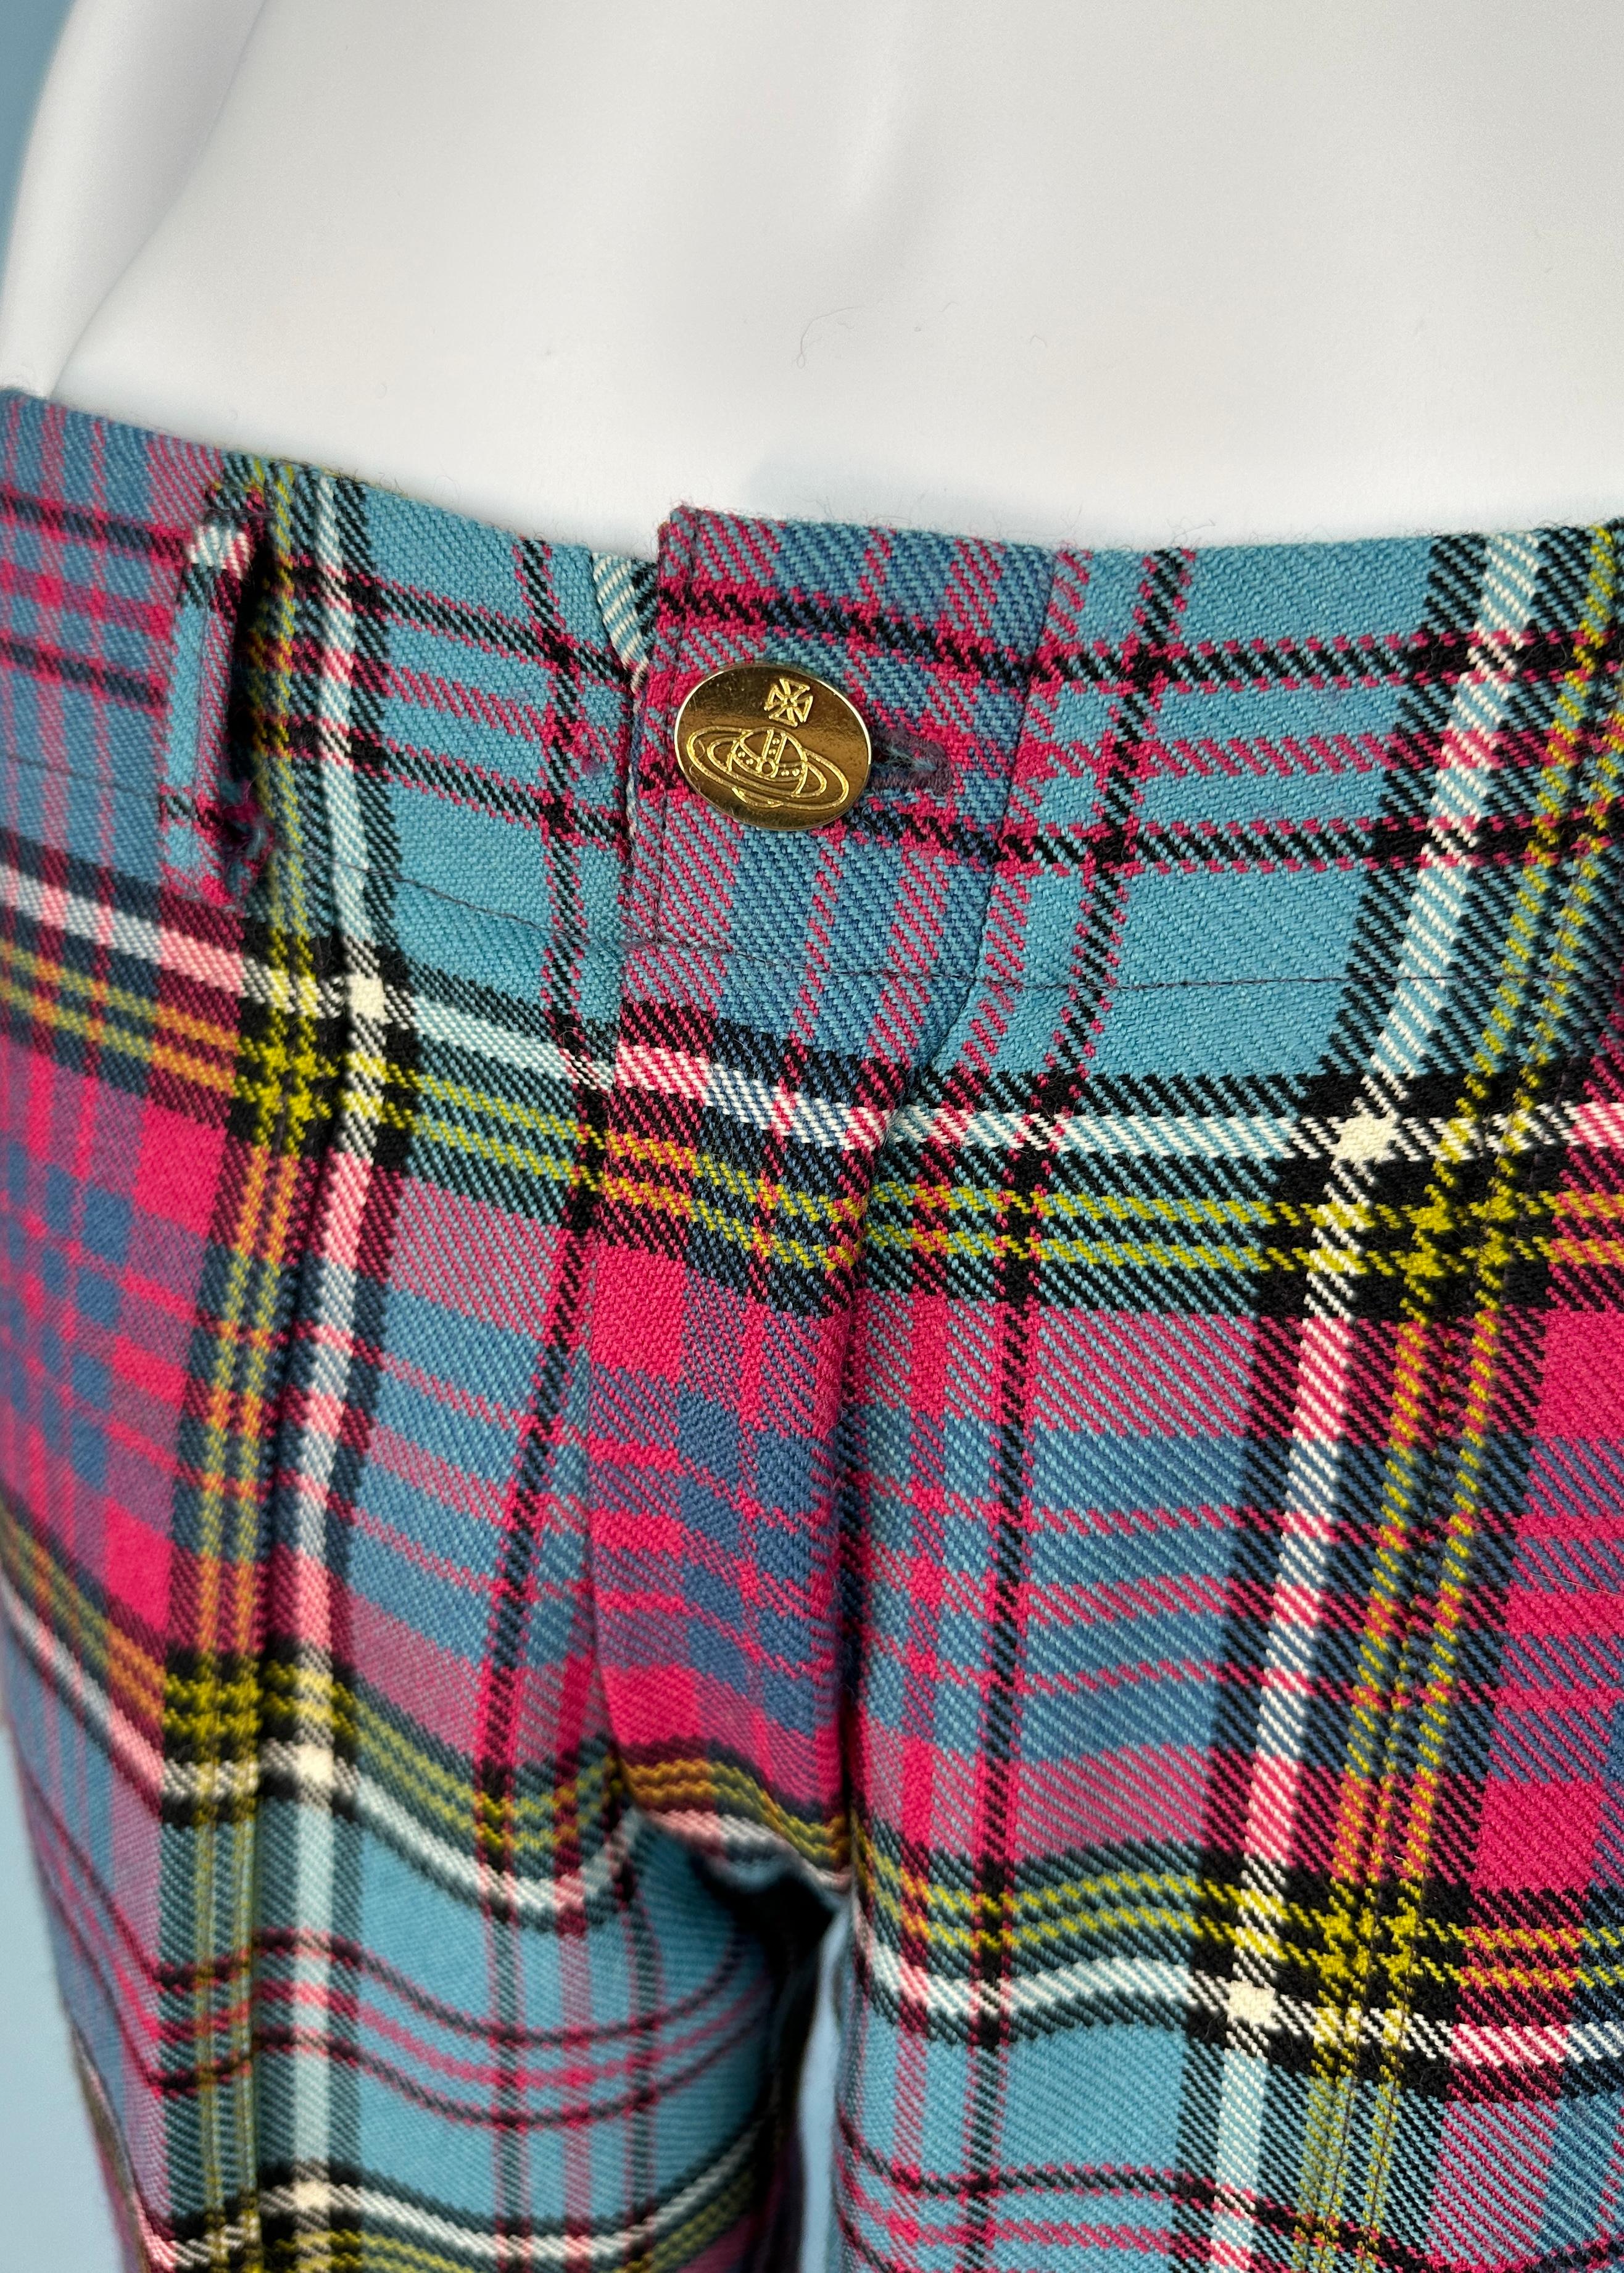 Vivienne Westwood c.1996 MacAndreas Tartan Bondage Pants Trousers In Excellent Condition For Sale In Hertfordshire, GB